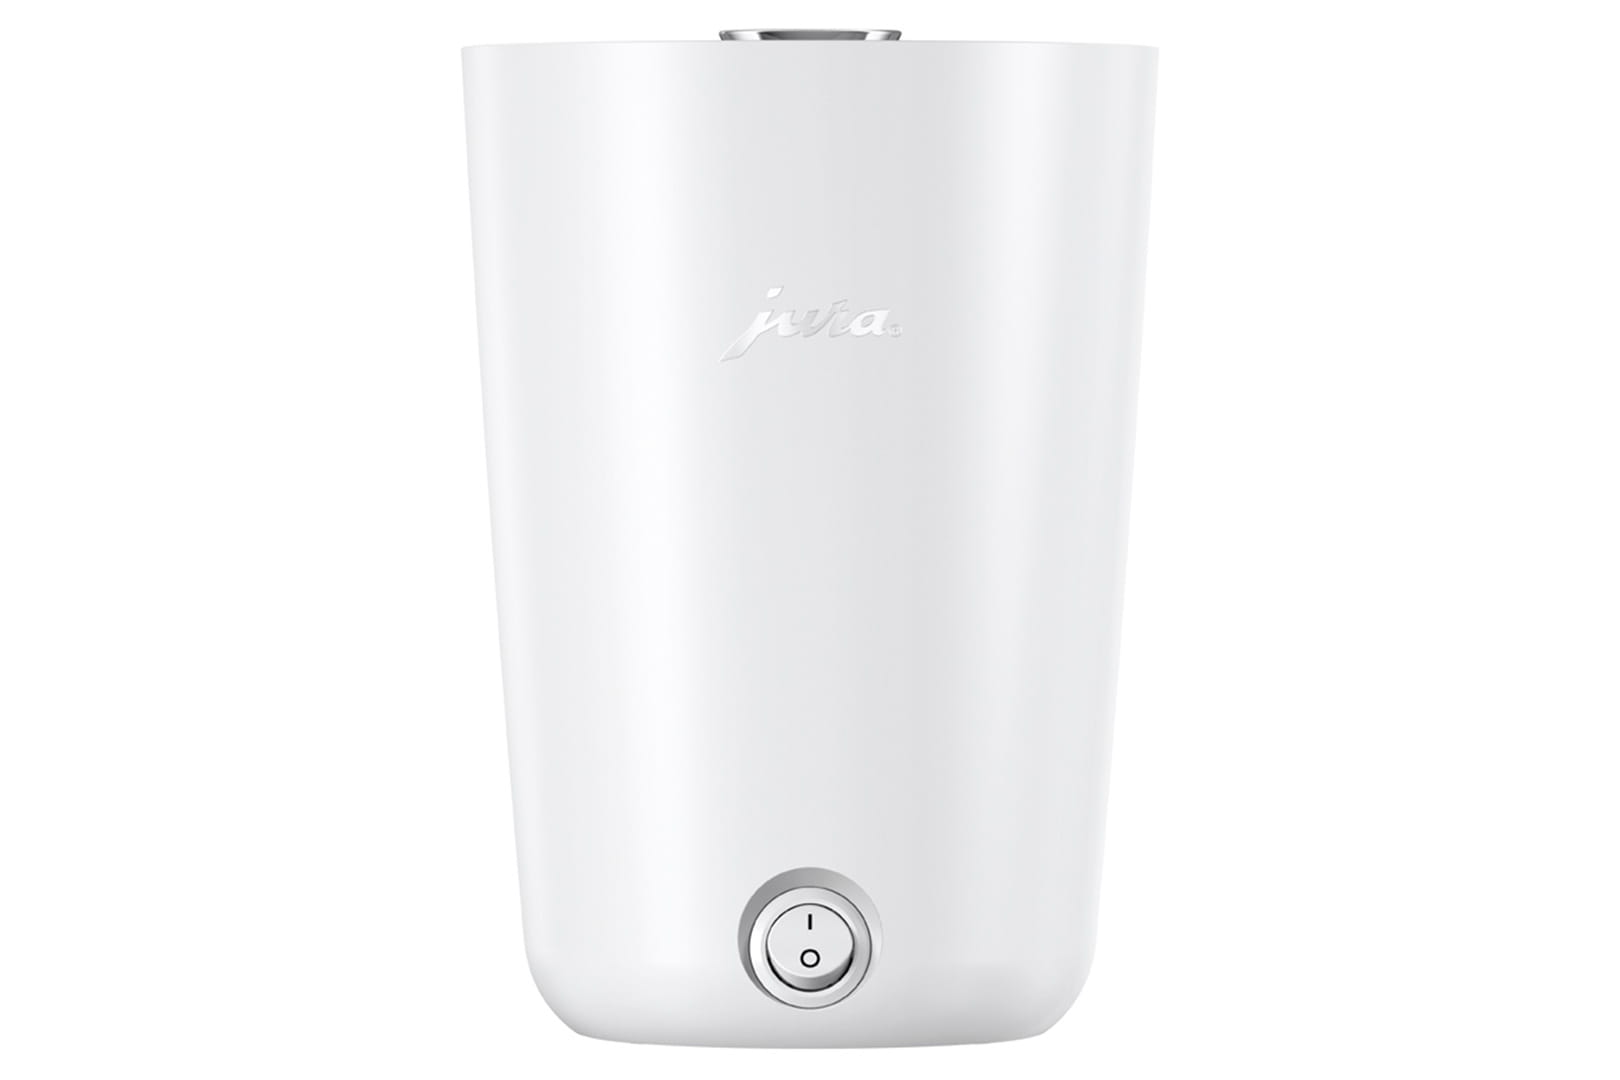 https://www.jura.com/-/media/global/images/home-products/accessories/CupWarmer-S/white/image-gallery/cupwarmer_s_white_image2.jpg